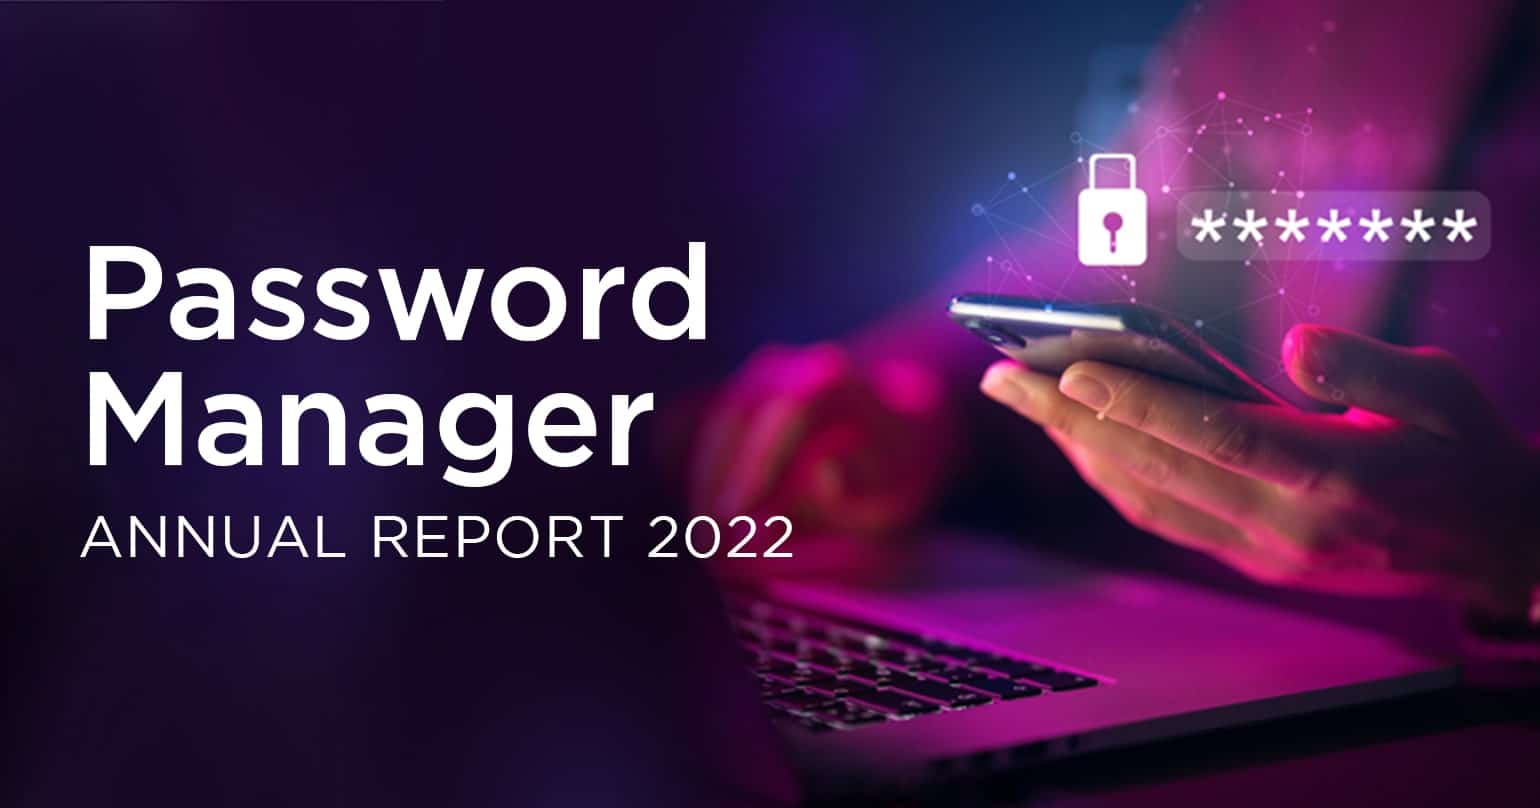 Password Manager Annual Report 2022